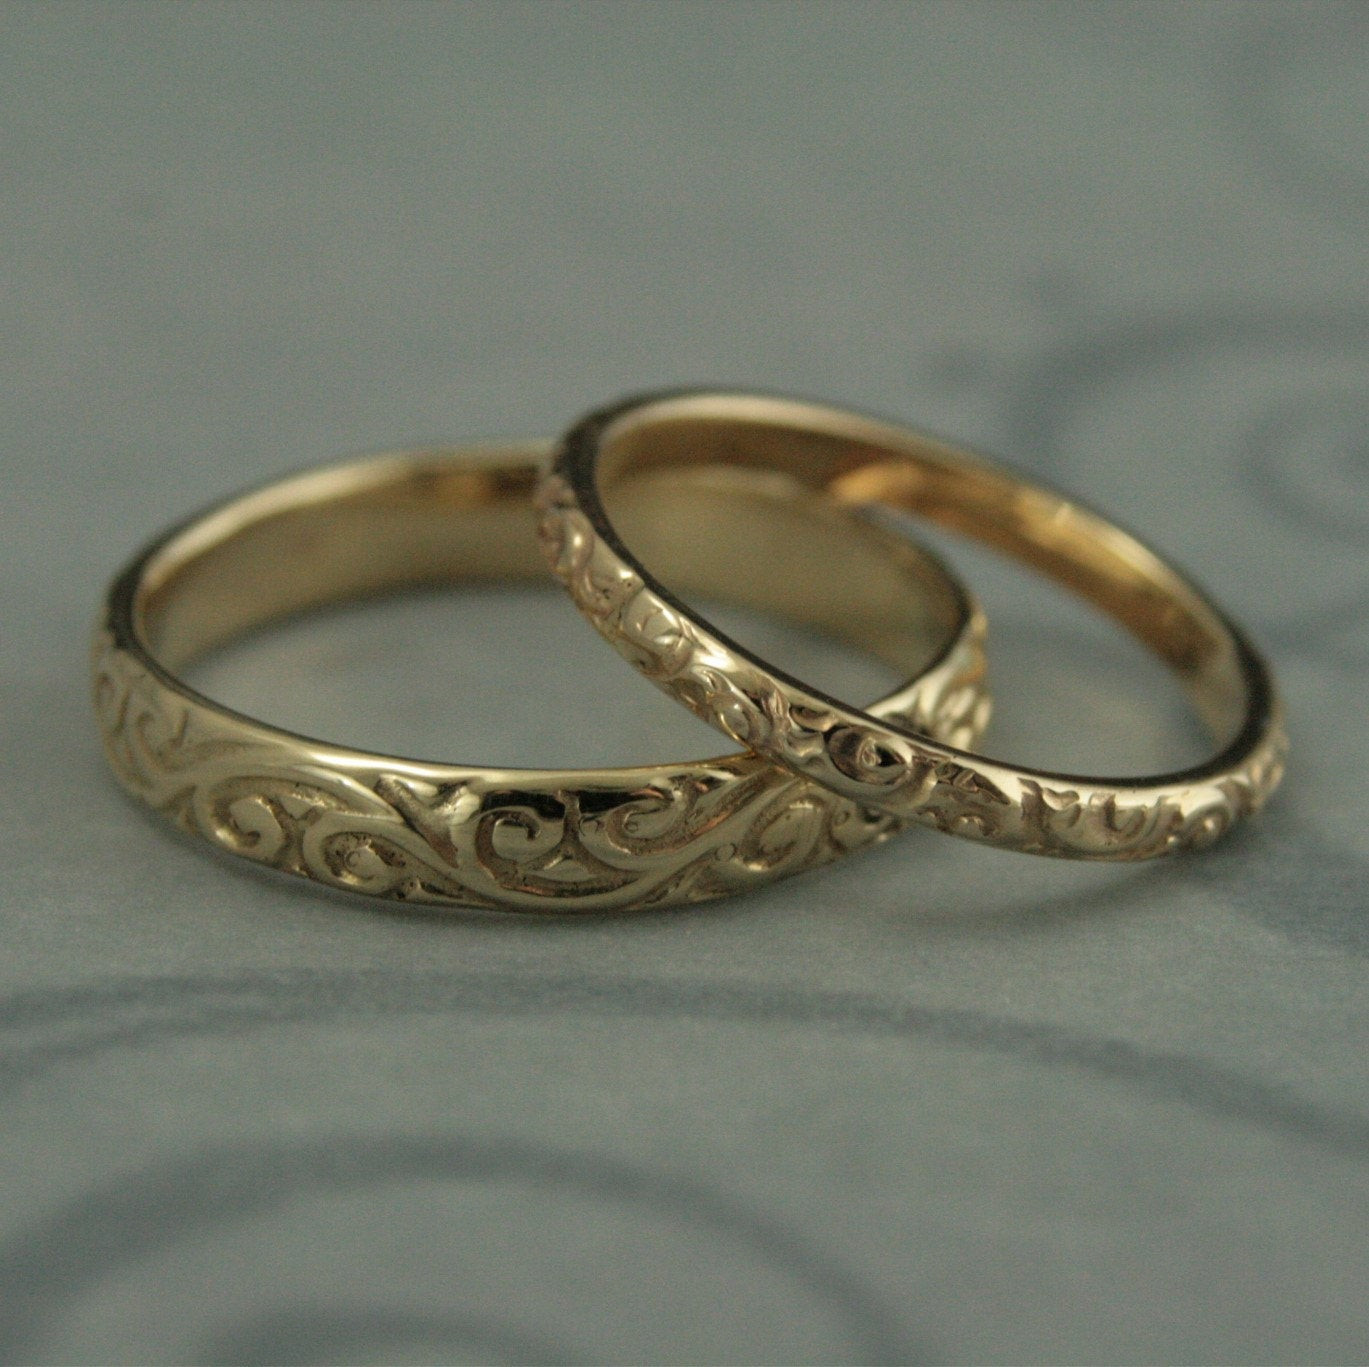 Antique Wedding Bands
 Patterned Wedding Band Set Vintage Style Wedding Rings His and